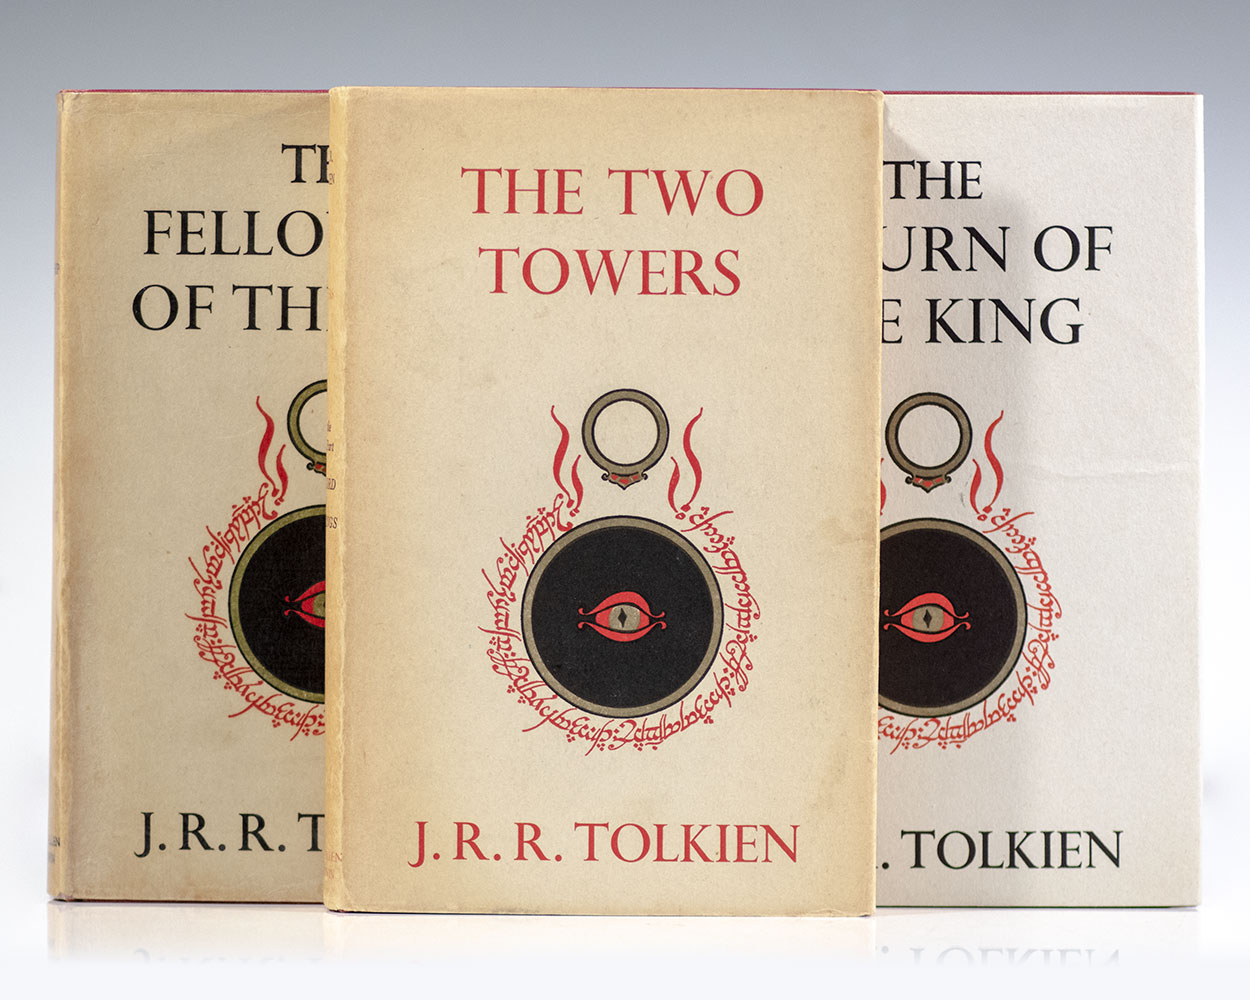 The Lord of the Rings: Two Towers